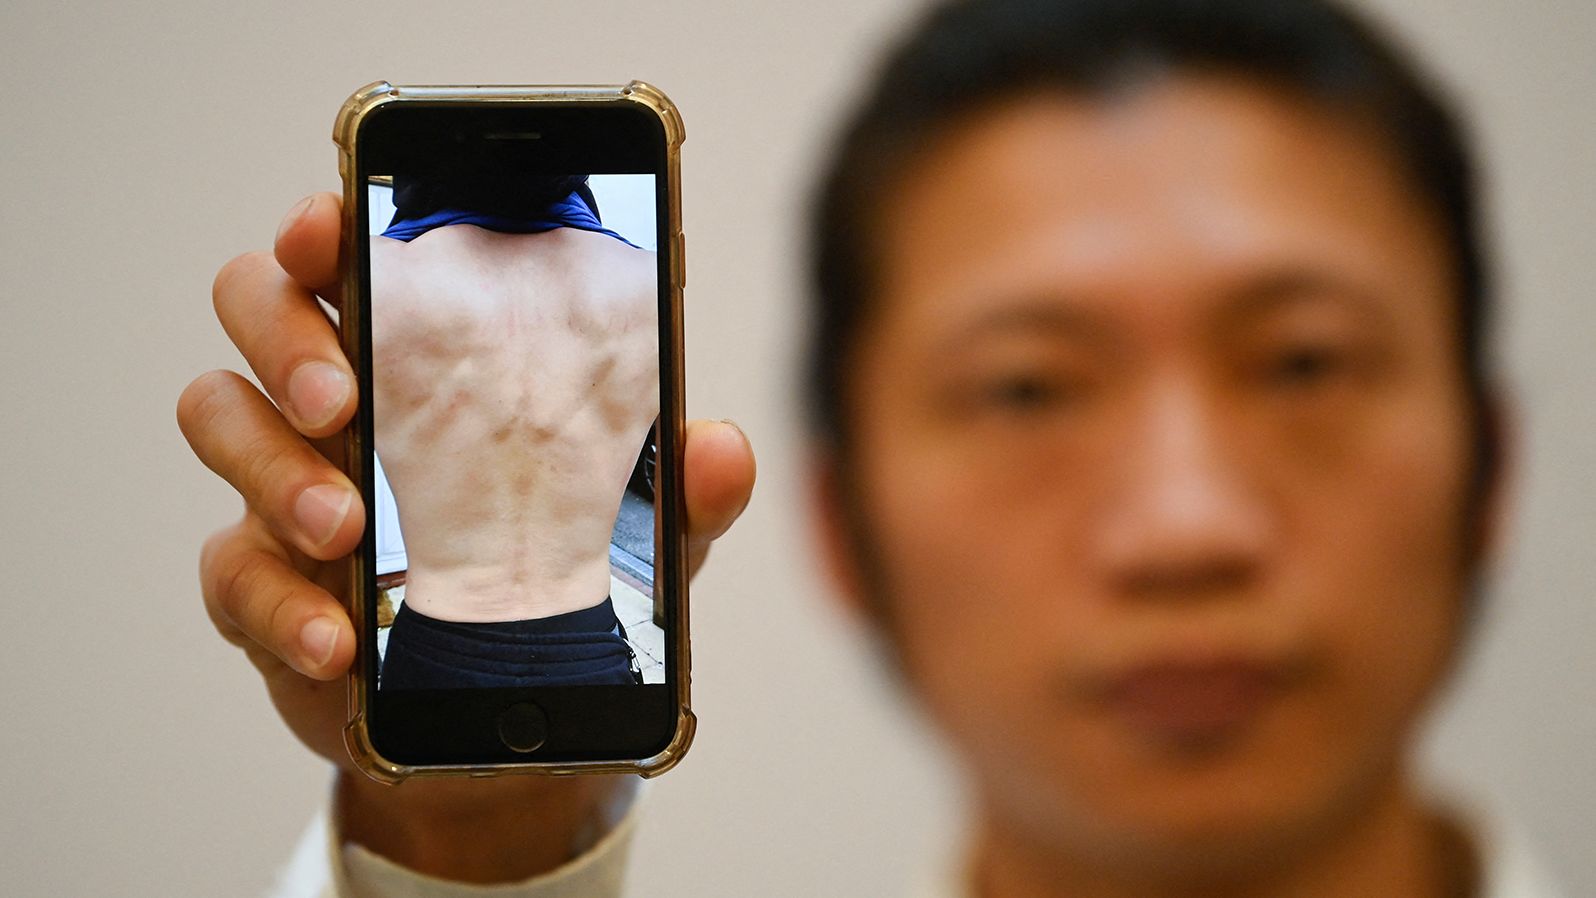 Hong Kong protester Bob Chan shows a photograph of his injuries at a news conference in London on October 19.